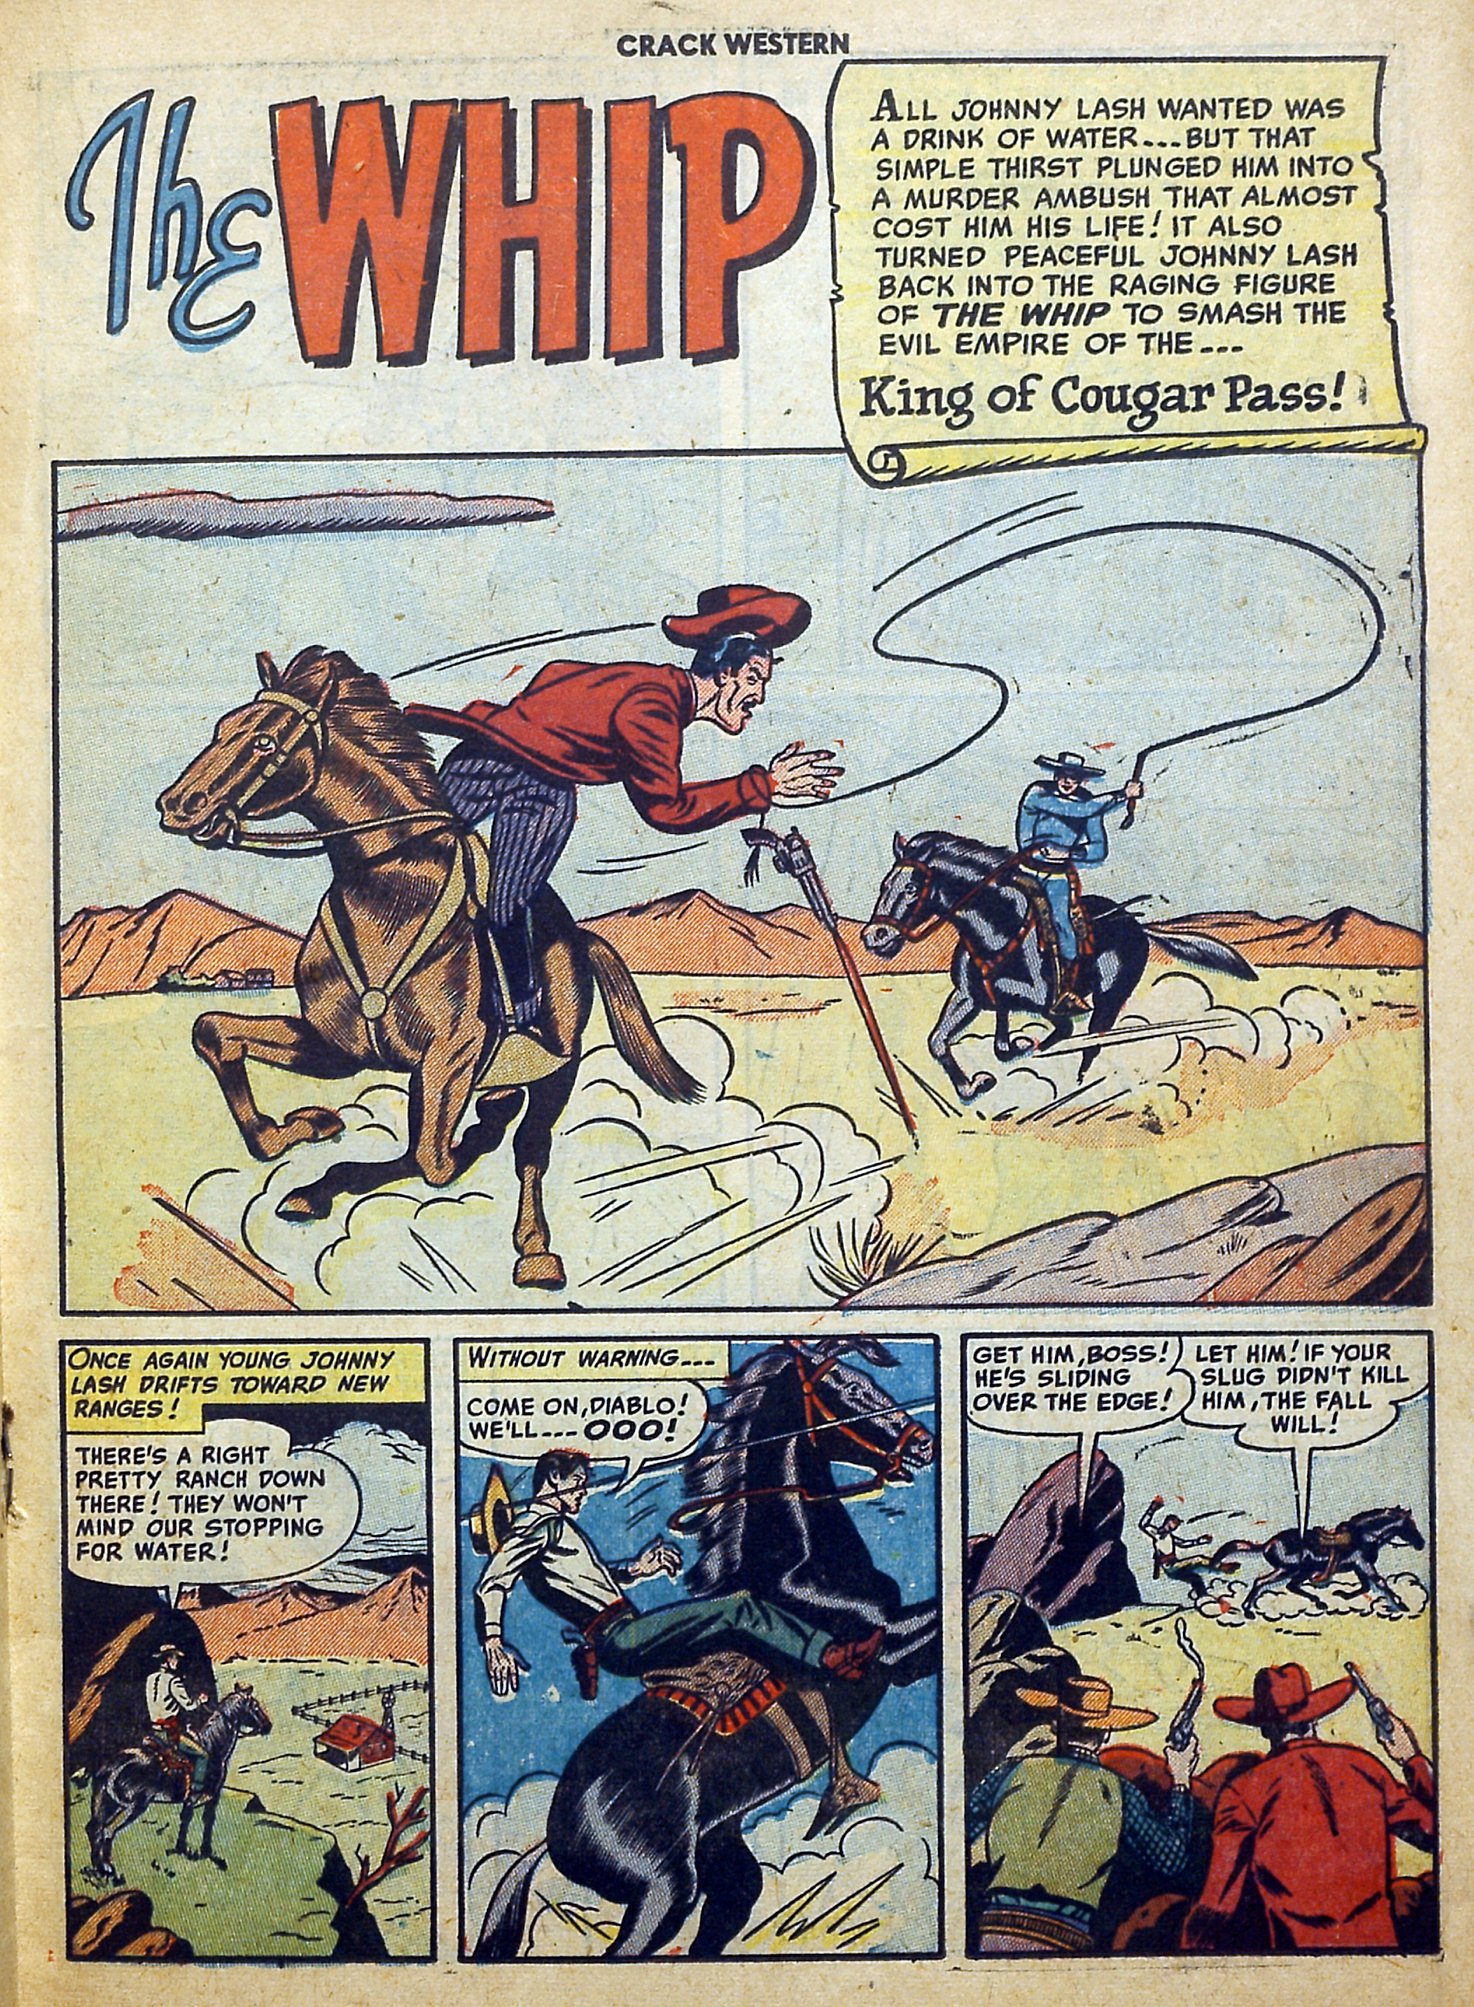 Read online Crack Western comic -  Issue #74 - 19